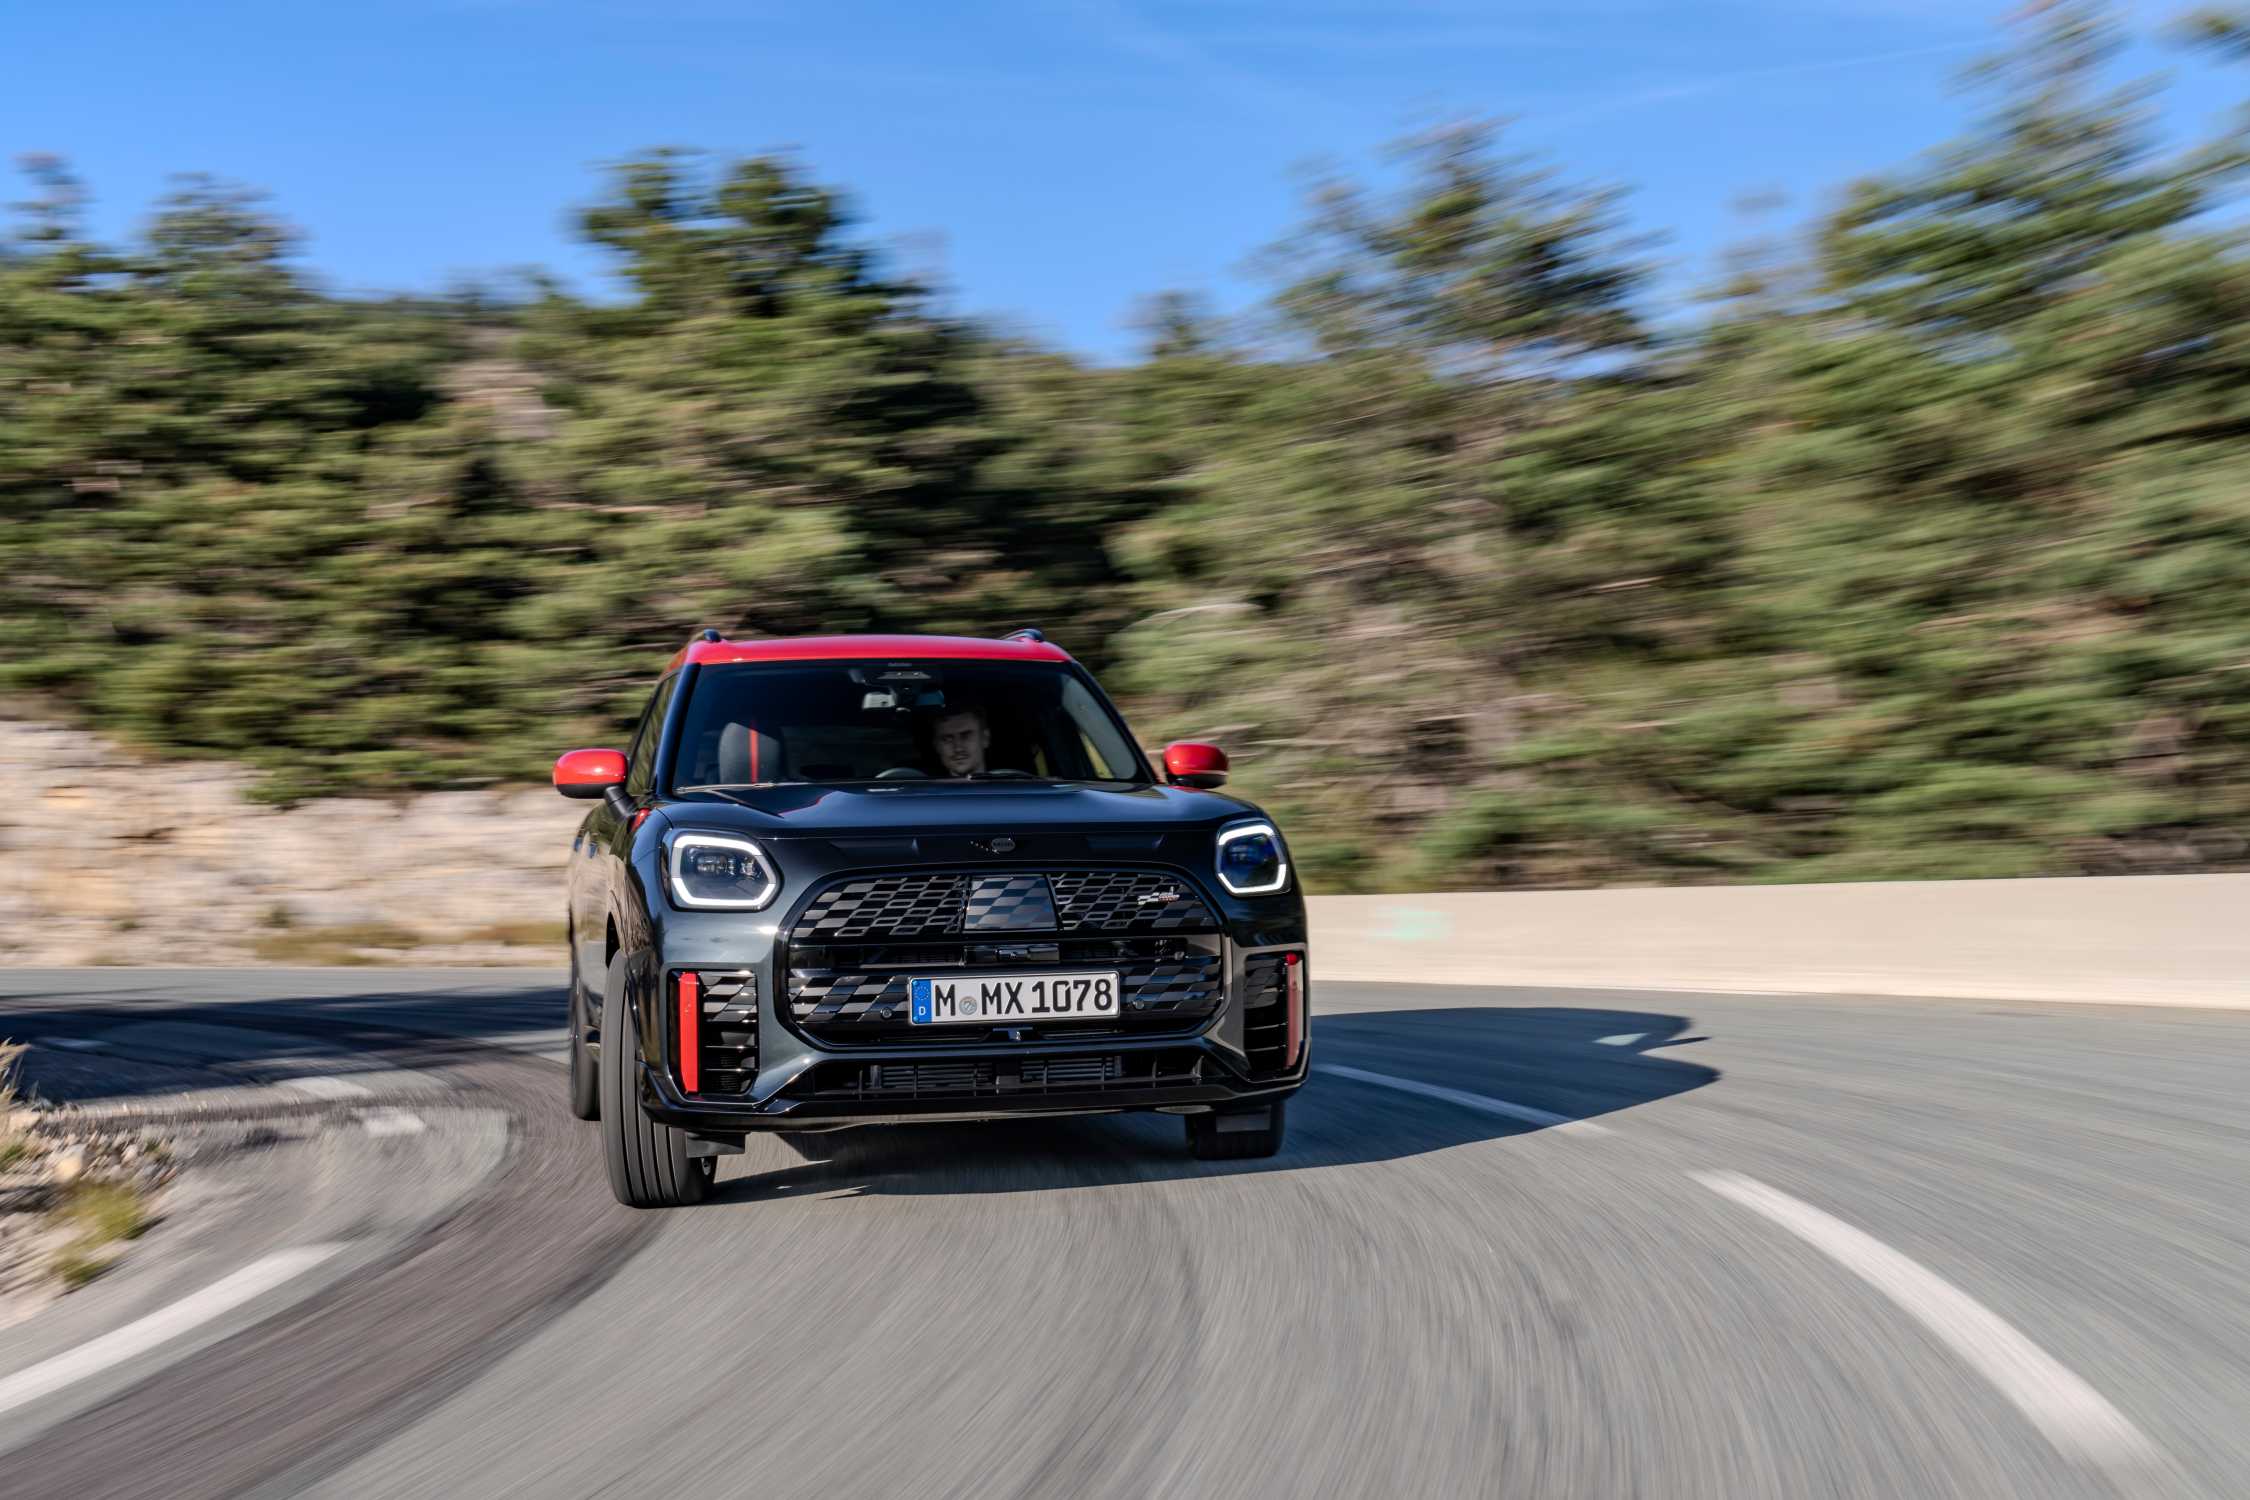 Mini Countryman Engines, Driving and Performance